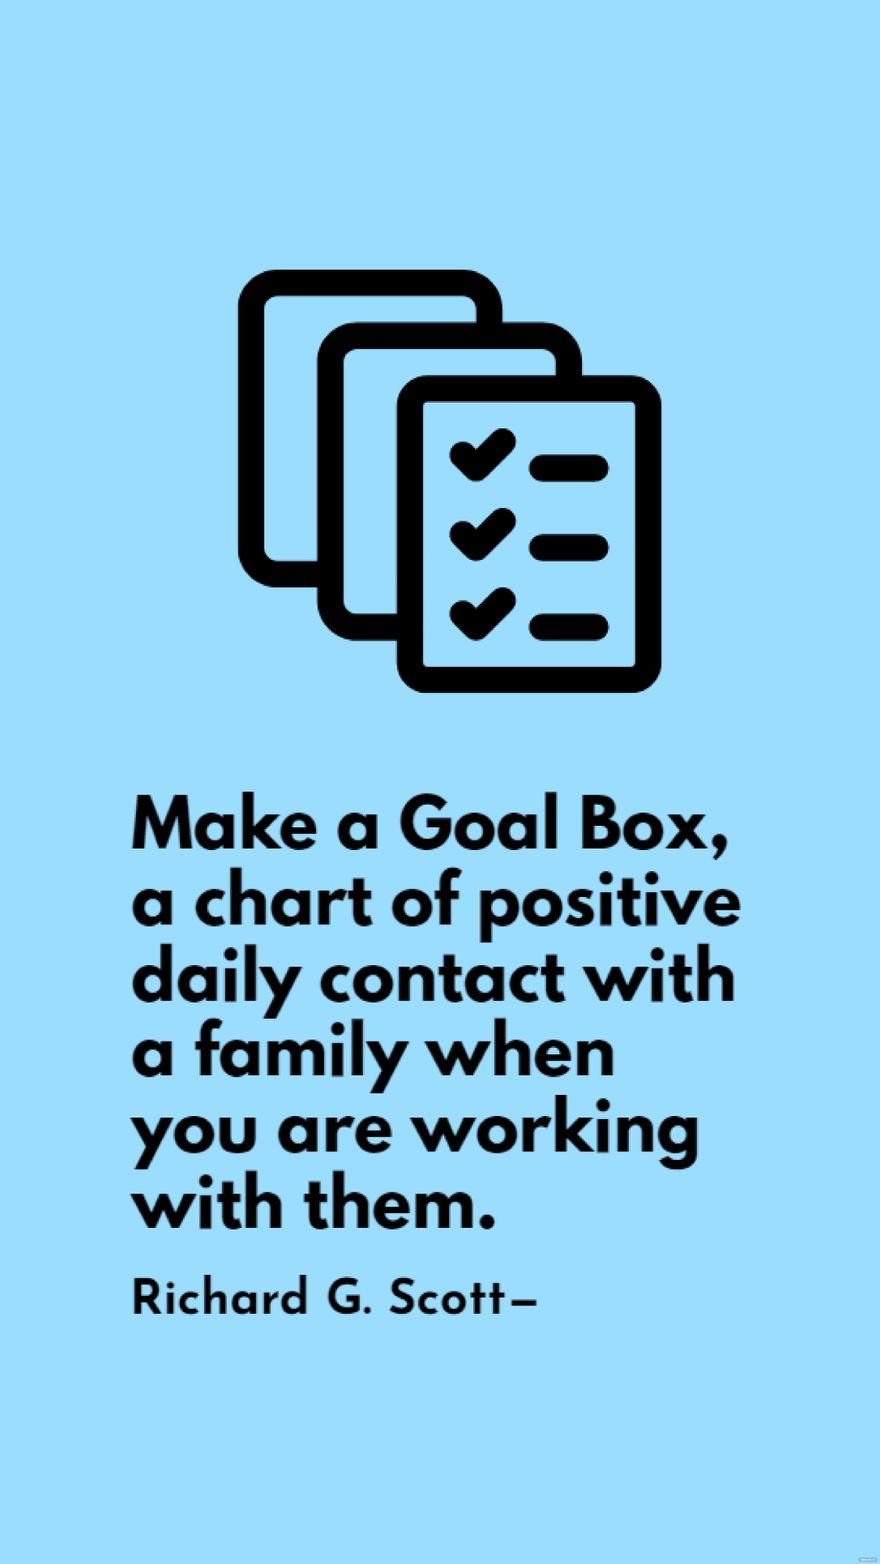 Richard G. Scott - Make a Goal Box, a chart of positive daily contact with a family when you are working with them.